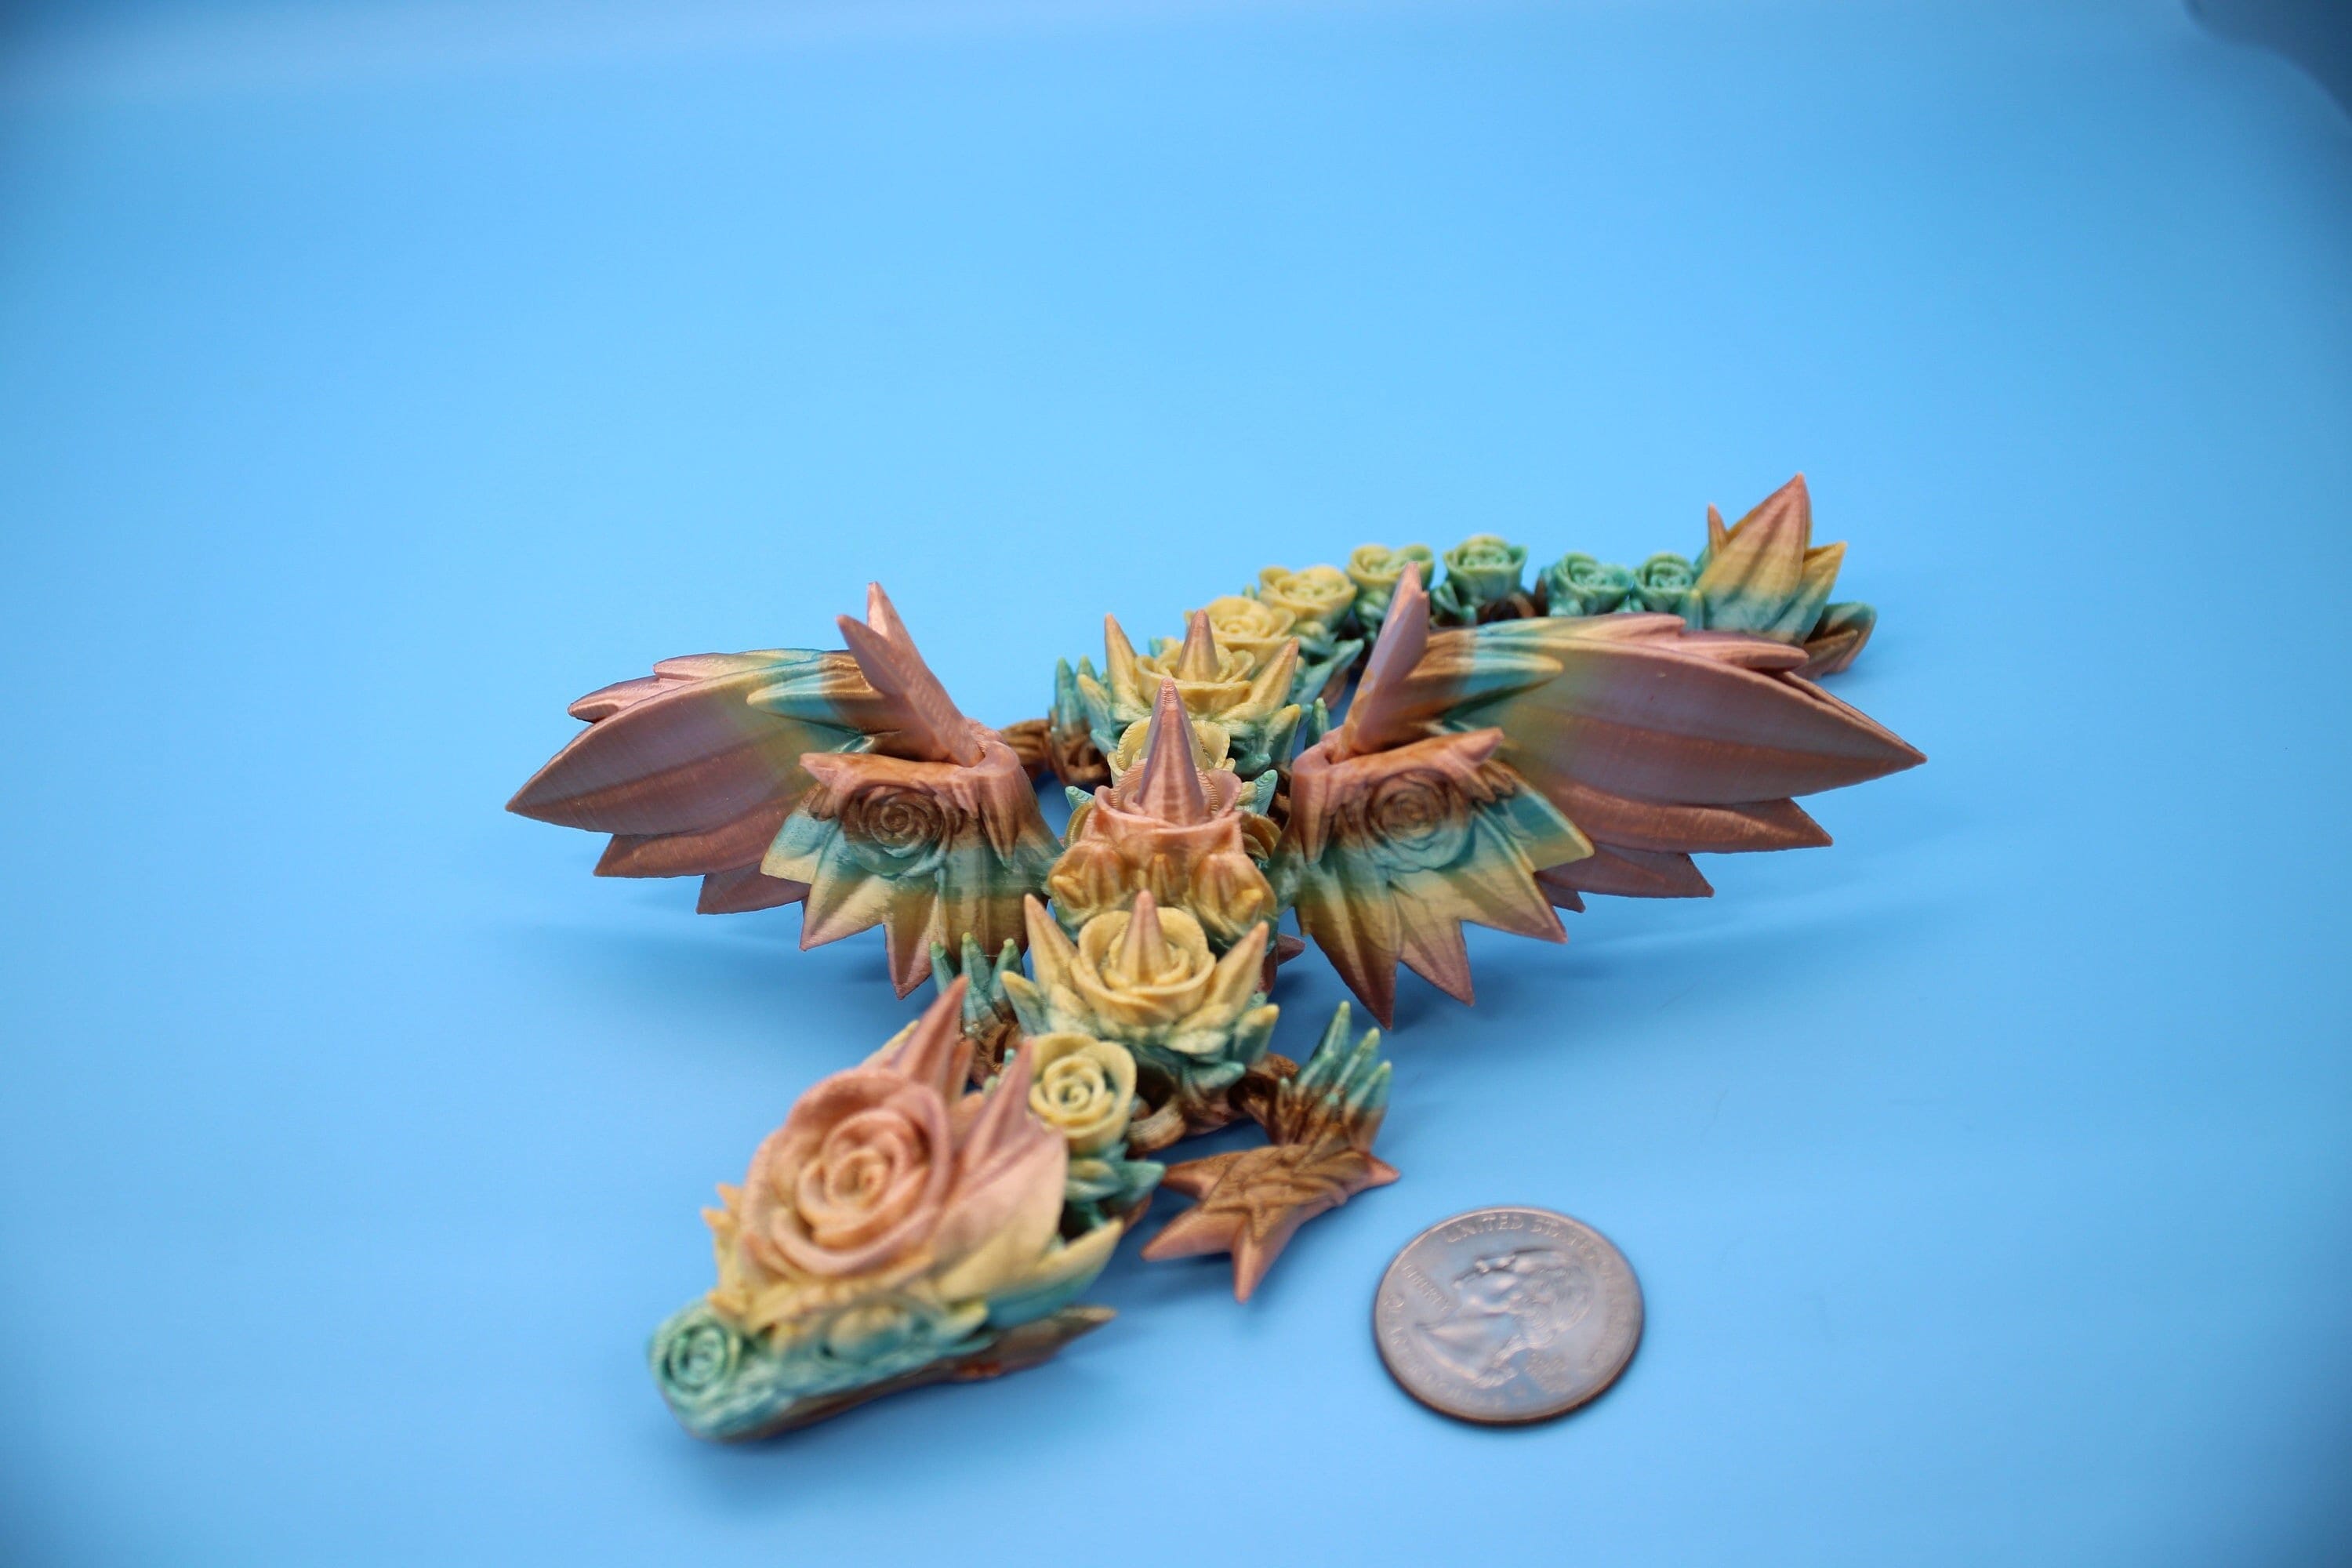 Miniature Baby Rose Wing Dragon | Rainbow | 3D printed articulating Toy Fidget | Flexi Toy 8.5 in. head to tail | Stress Relief Gift